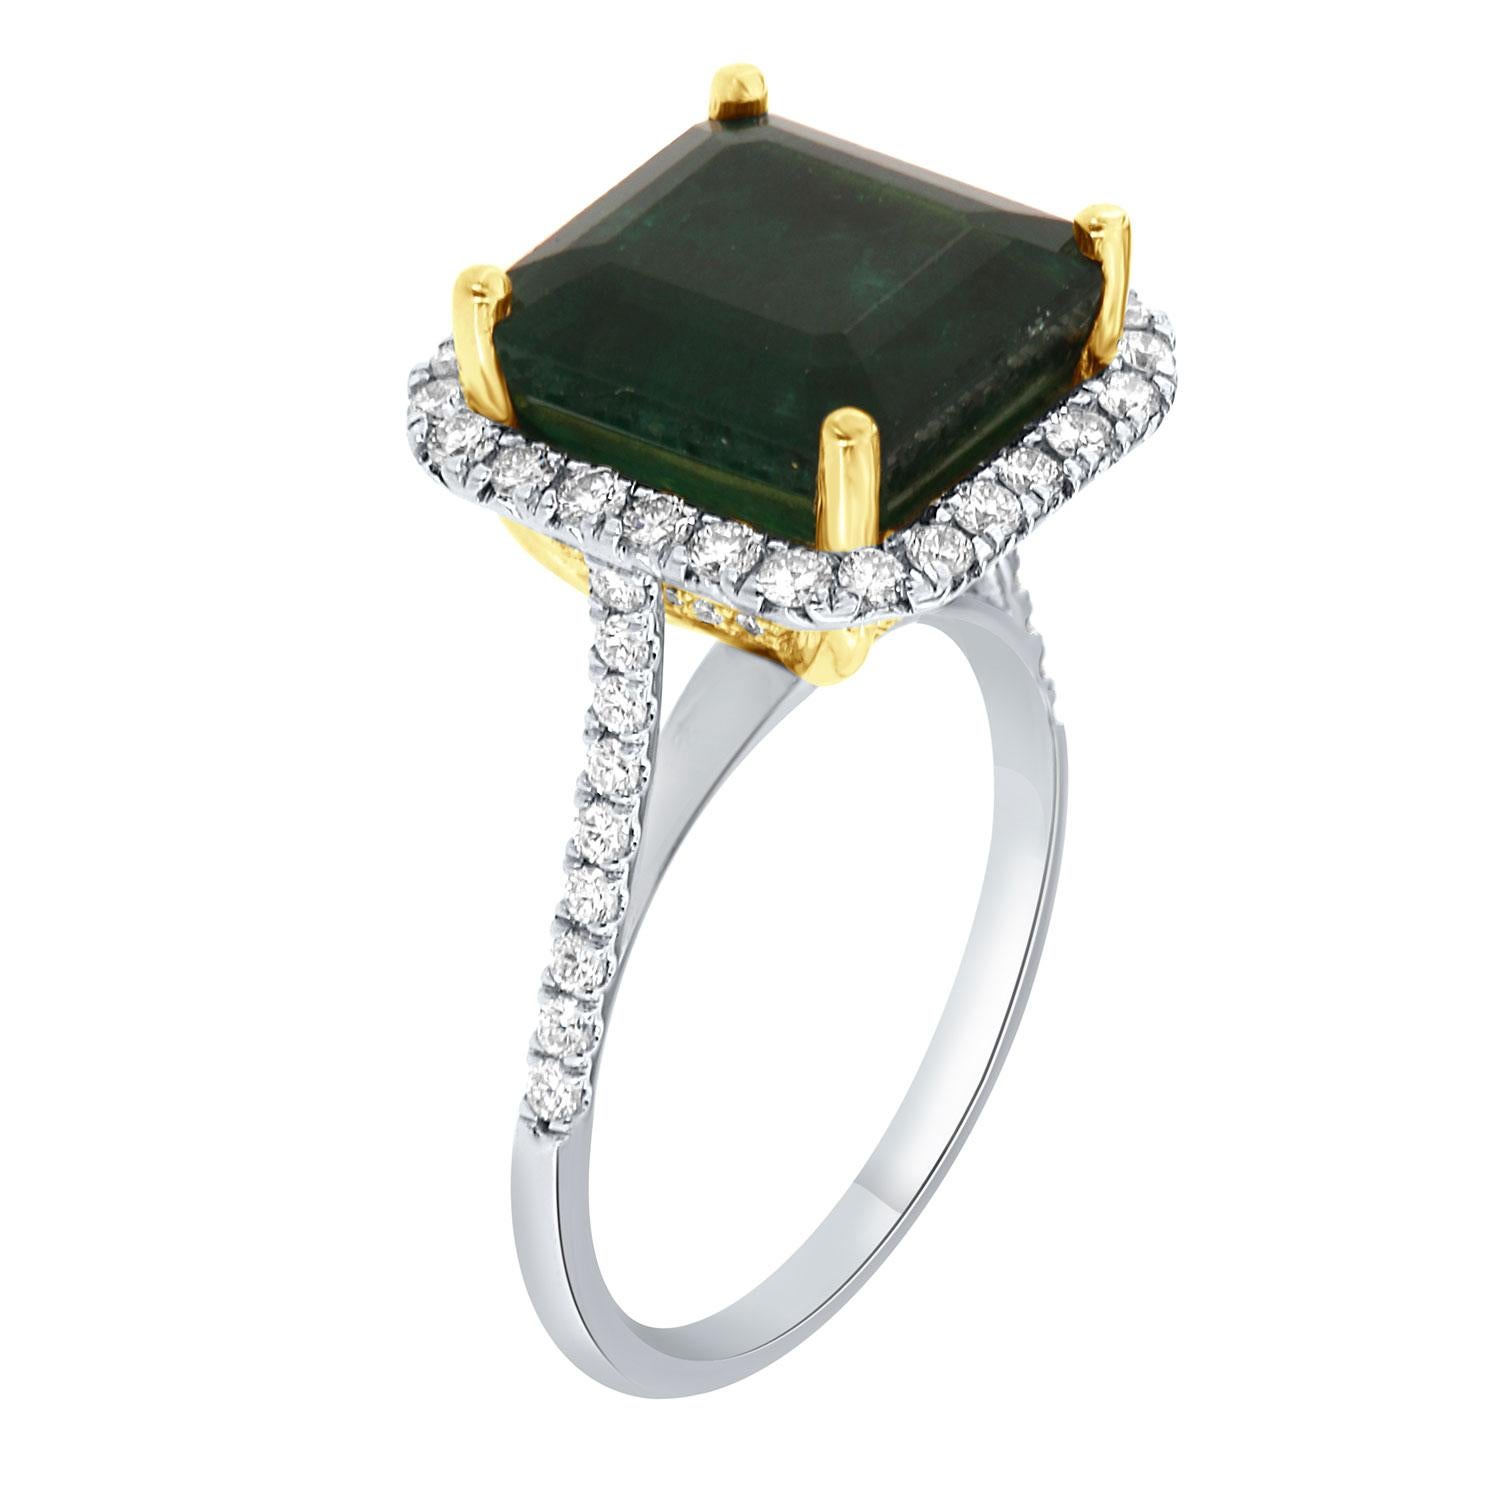 This 14K White and Yellow gold ring feature a GIA Certified 6.61-Carat Asscher cut Natural Green Emerald from Zambia. A halo of brilliant round diamonds encircles the emerald. Three rows of diamonds Micro-Prong set underneath the halo on the yellow